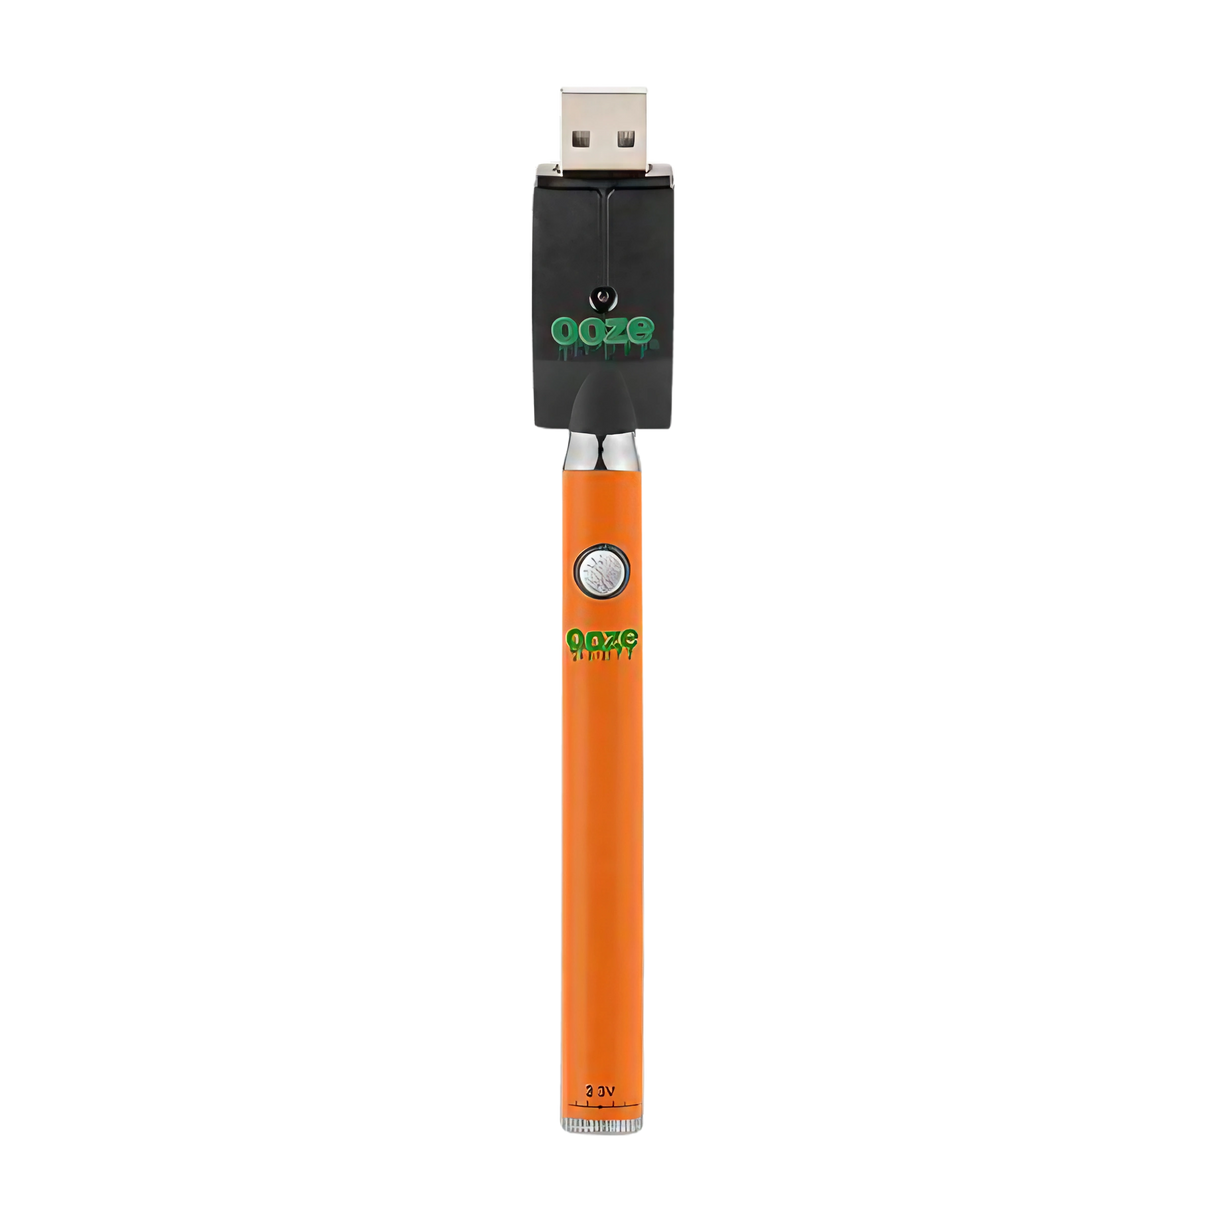 Ooze Slim Twist Battery in orange with USB charger, 510 thread, front view on white background